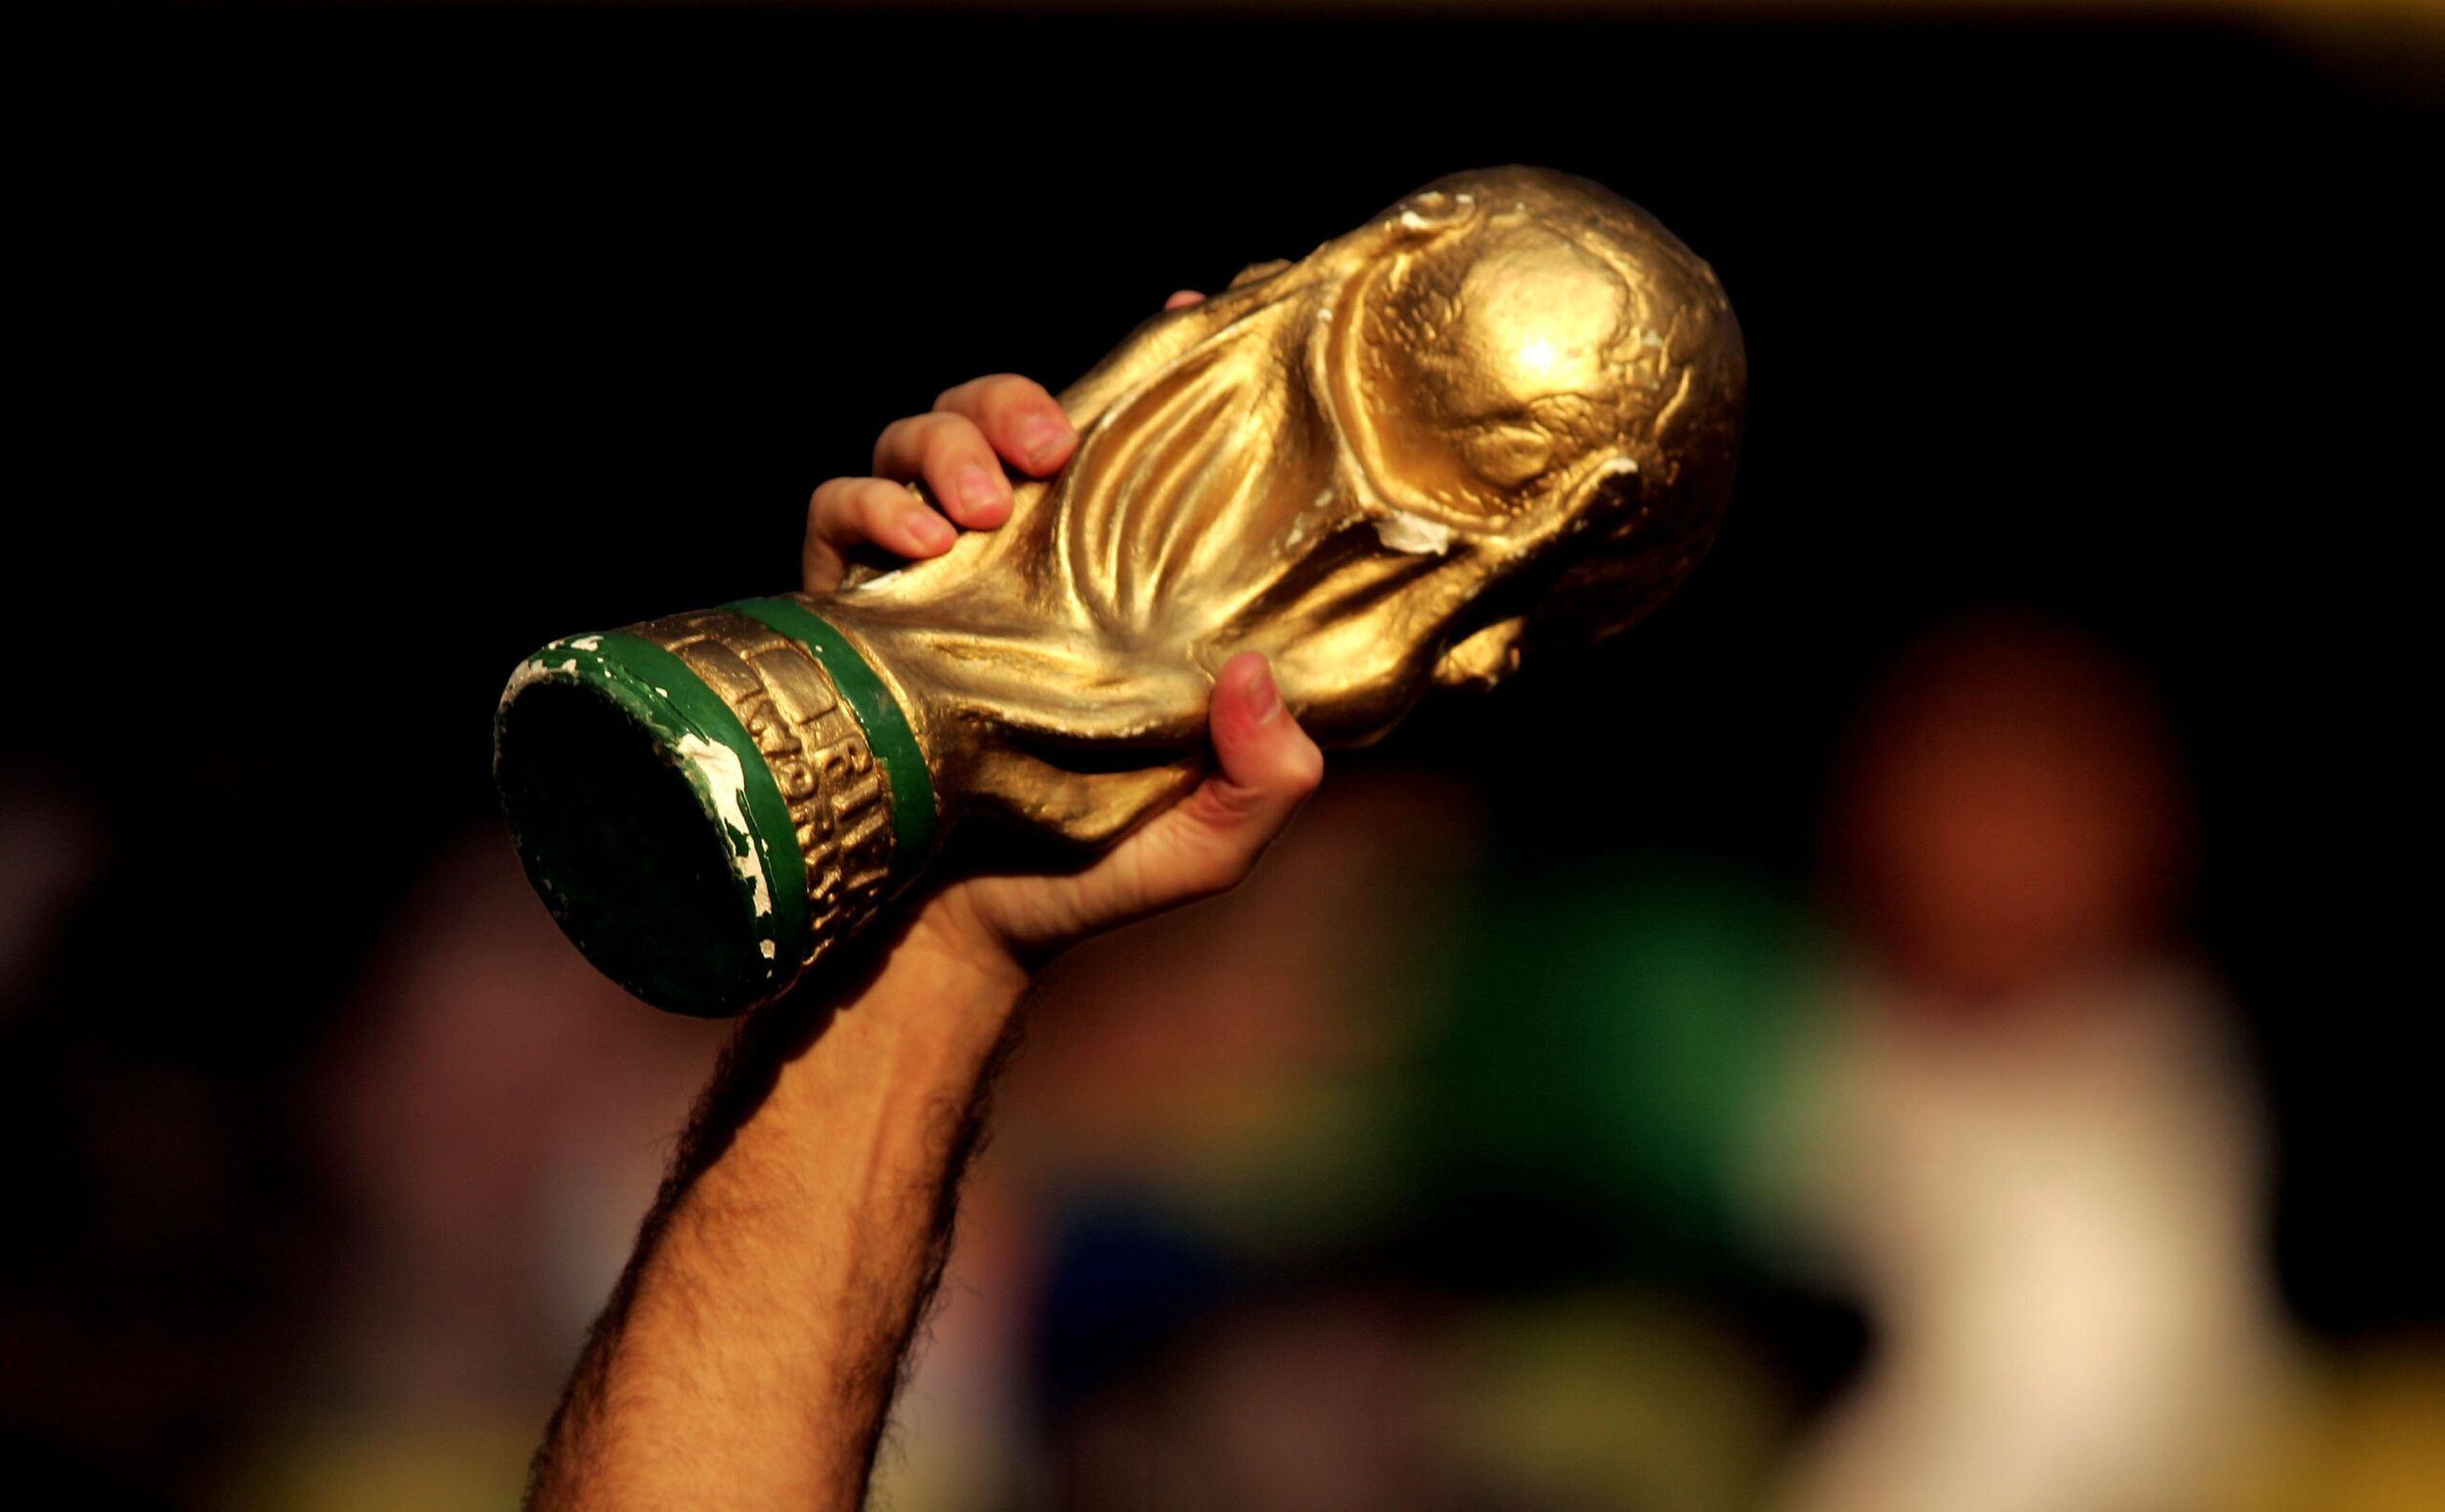 The World Cup trophy held aloft